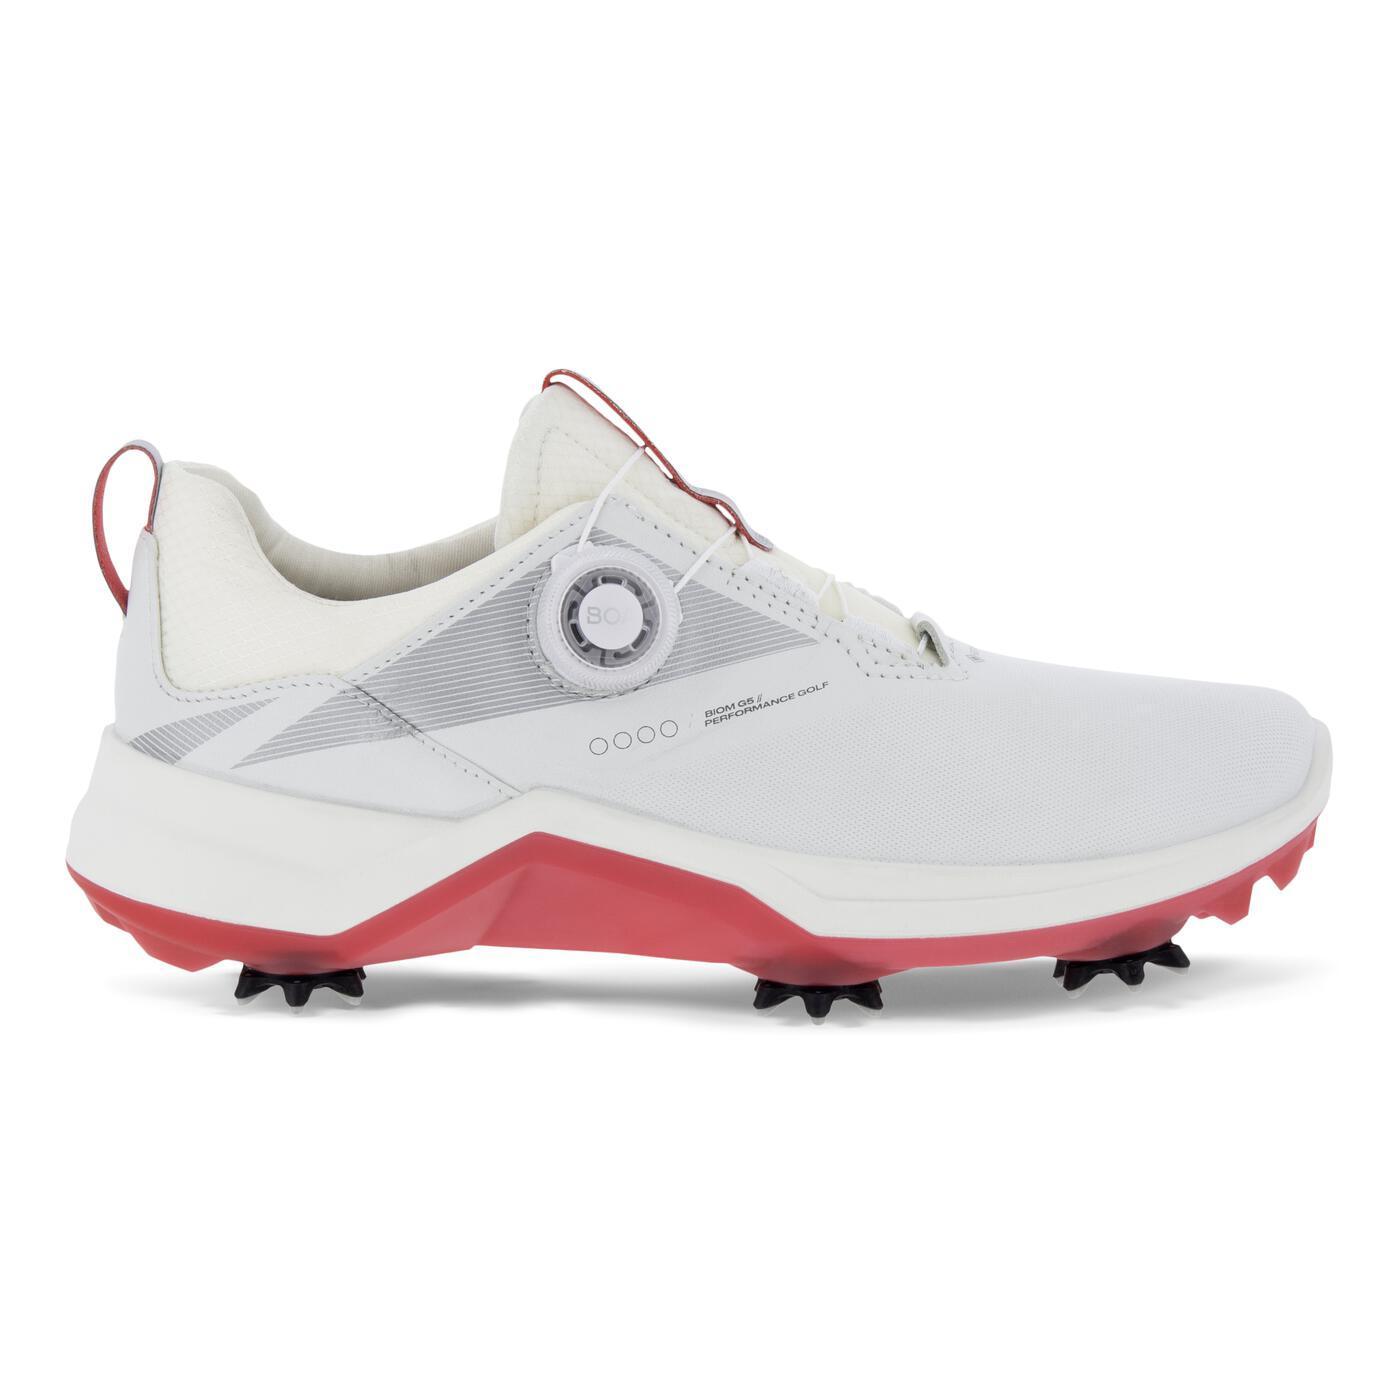 ECCO Golf Biom G5 BOA Golf Shoes (White) Women's Shoes Product Image